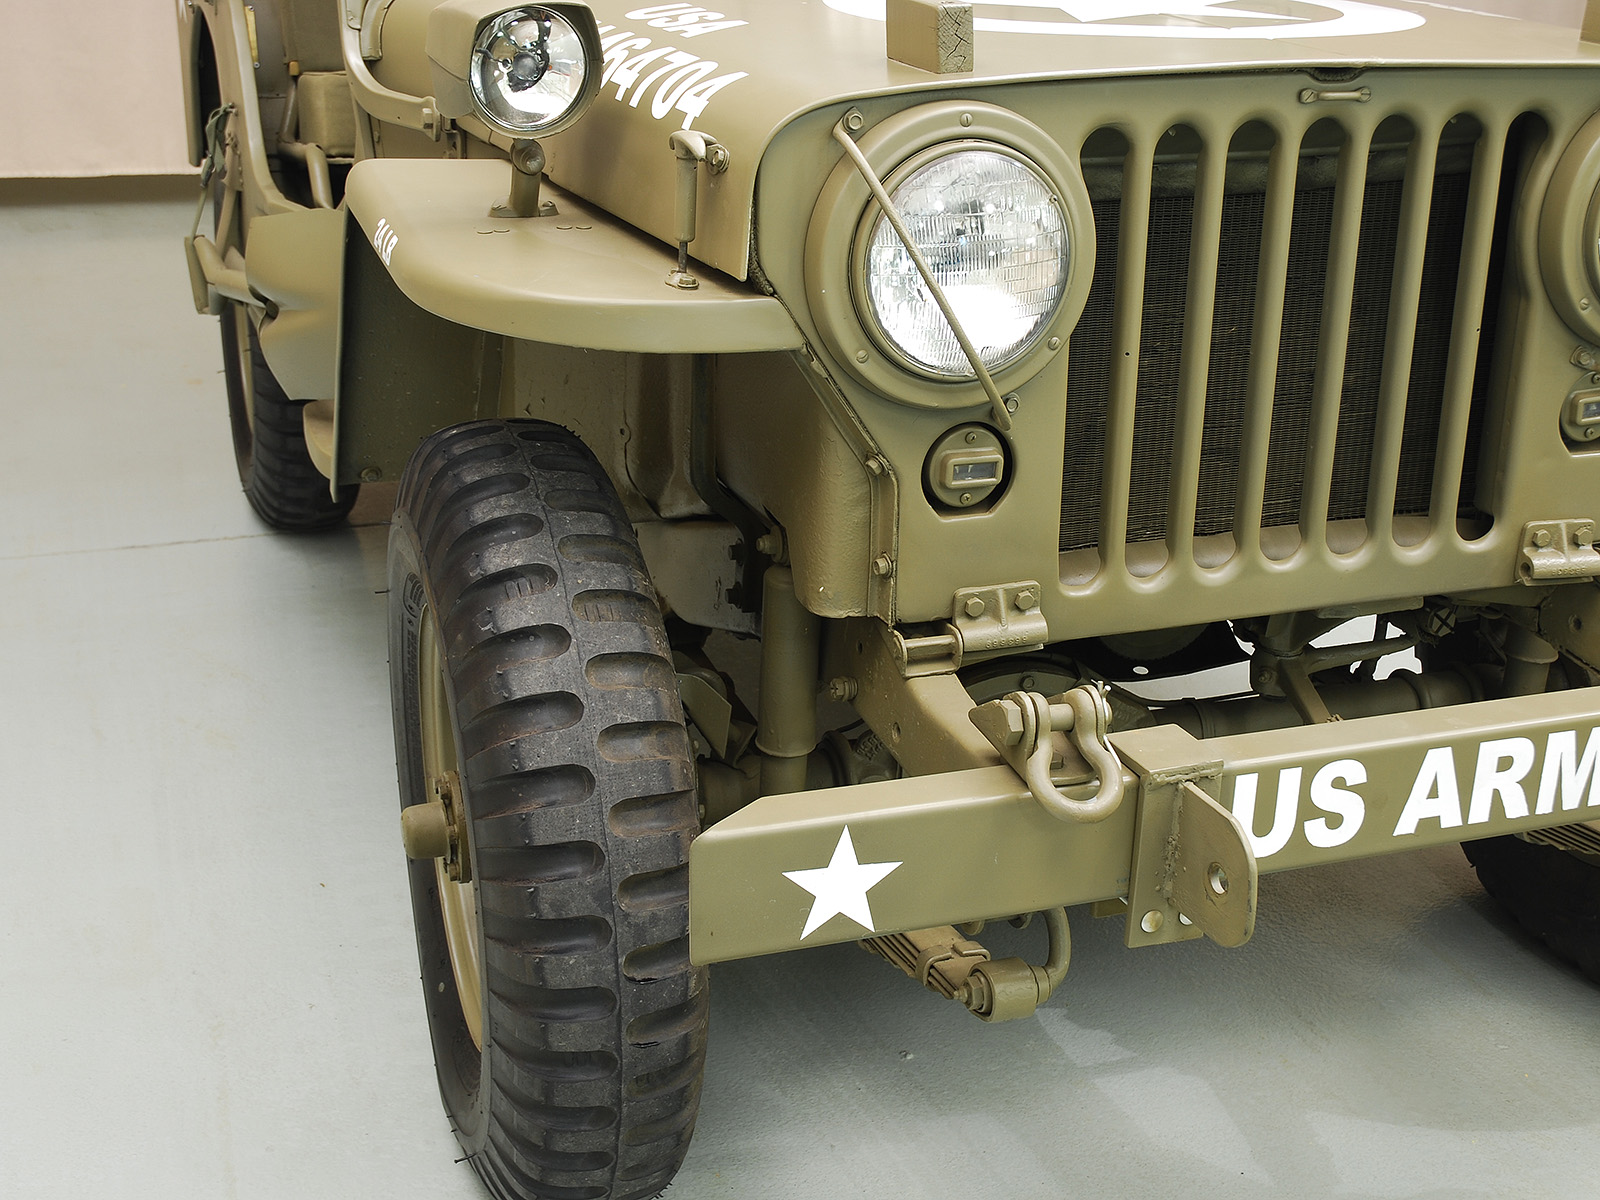 1955 willys-overland m38a1 1/4 ton